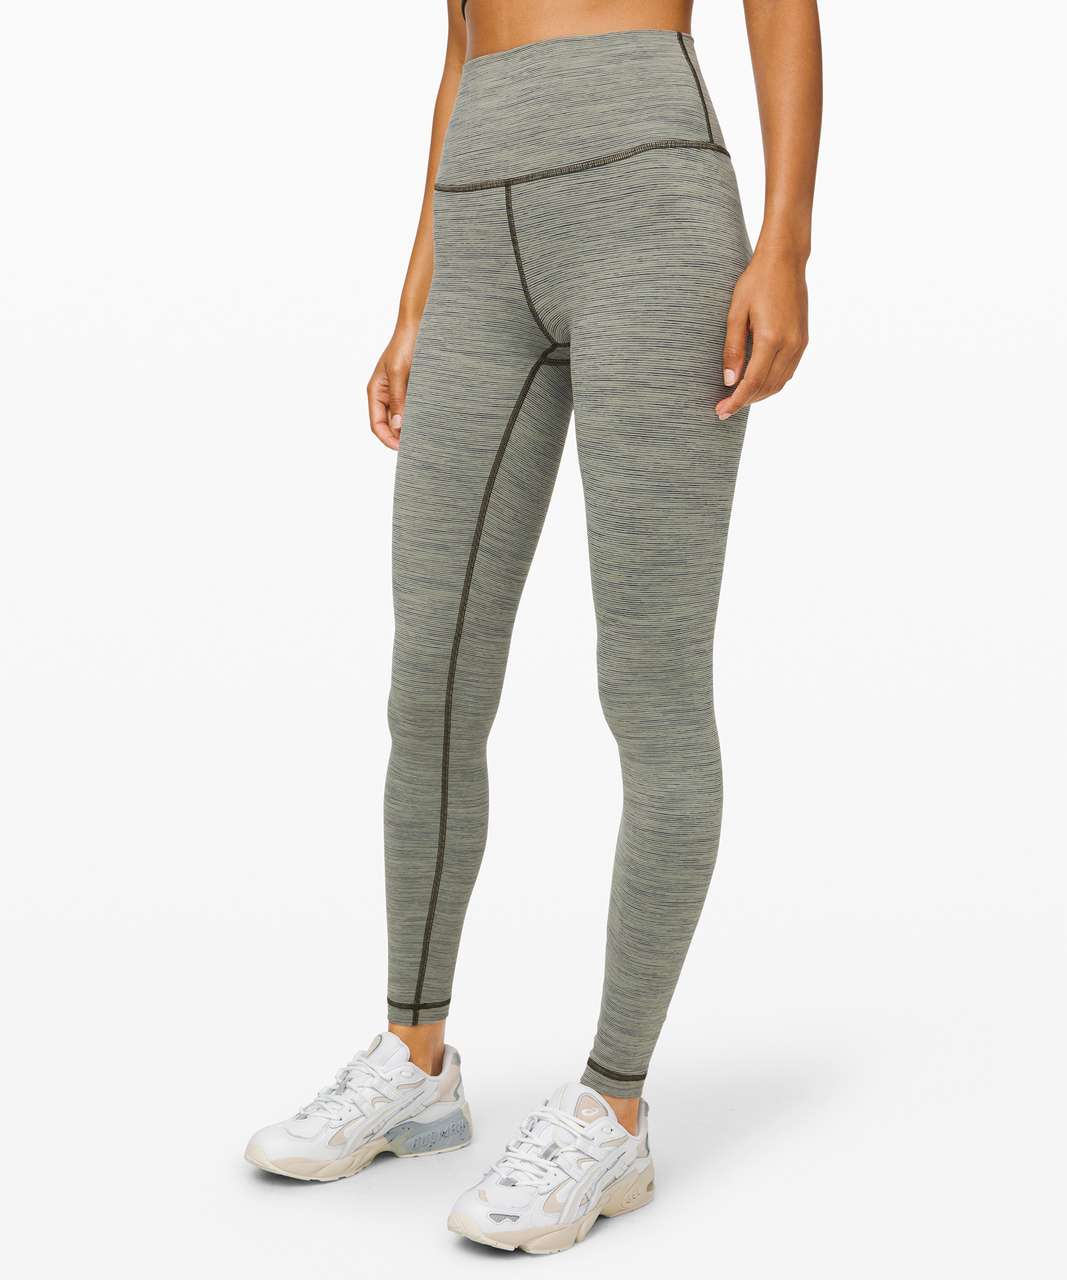 Lululemon Wunder Under High Rise Tight 28" *Luxtreme - Wee Are From Space Sage Dark Olive